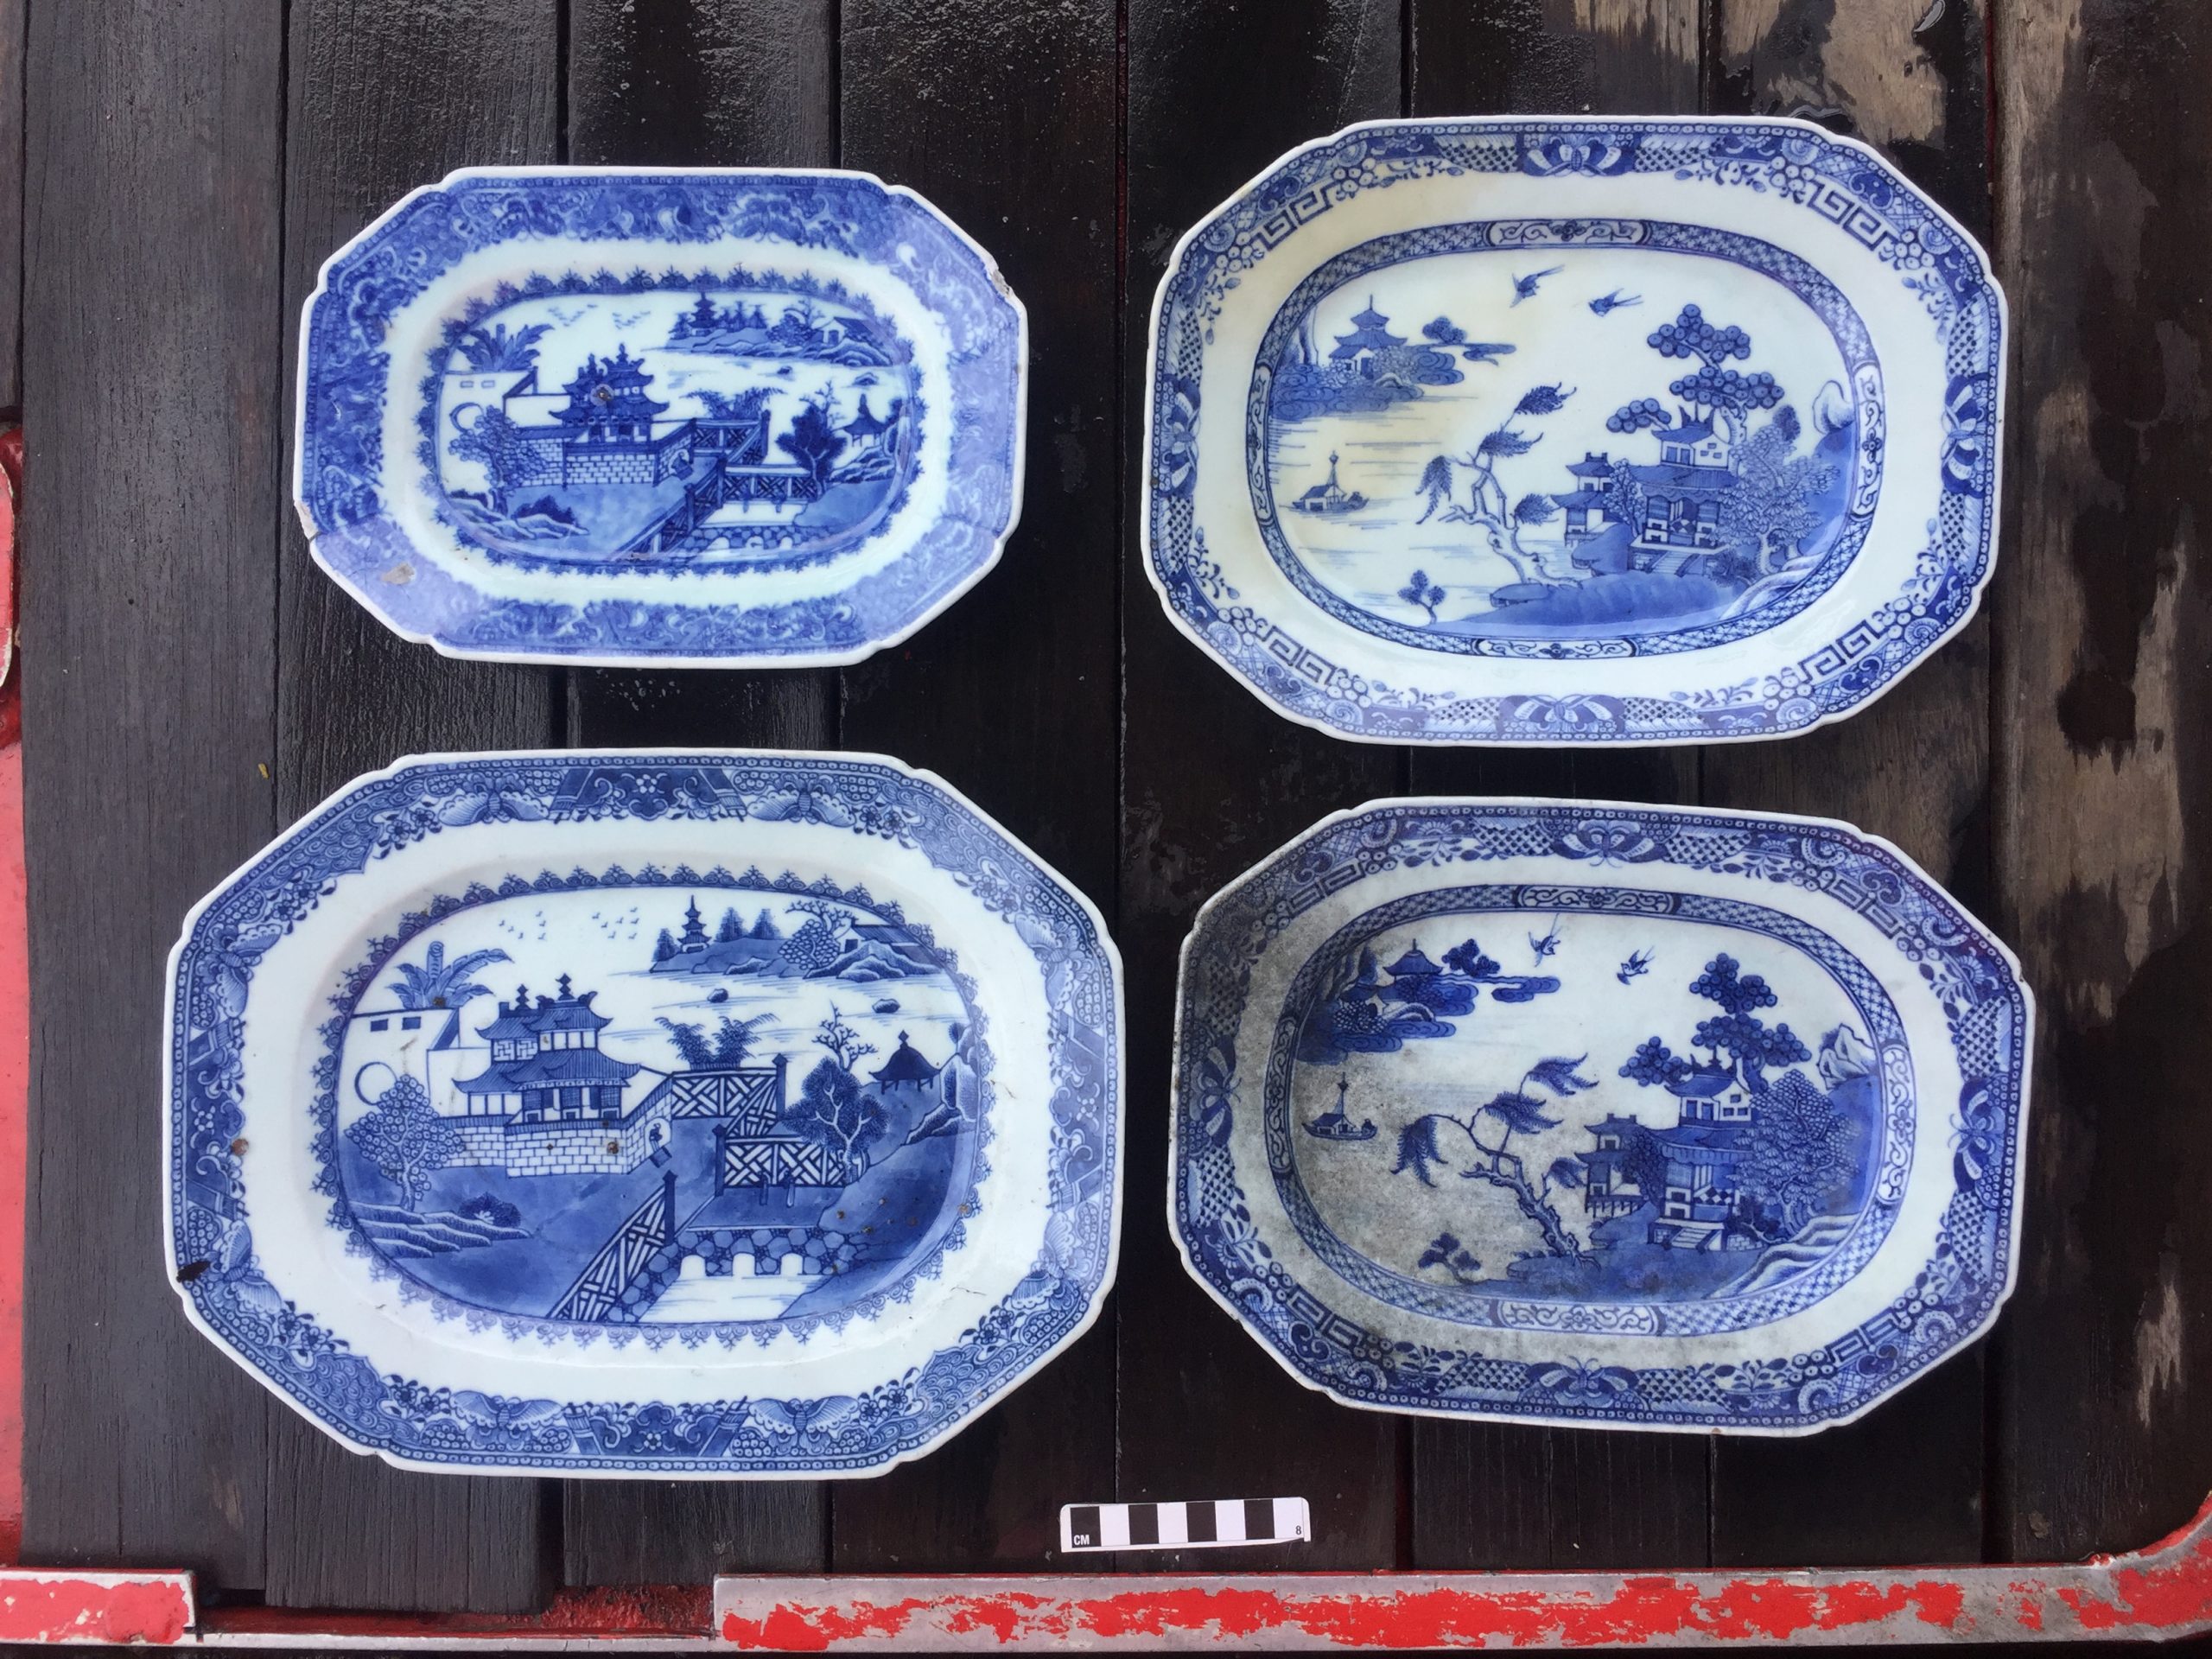 Octagonal serving dishes in perfect condition from SW2